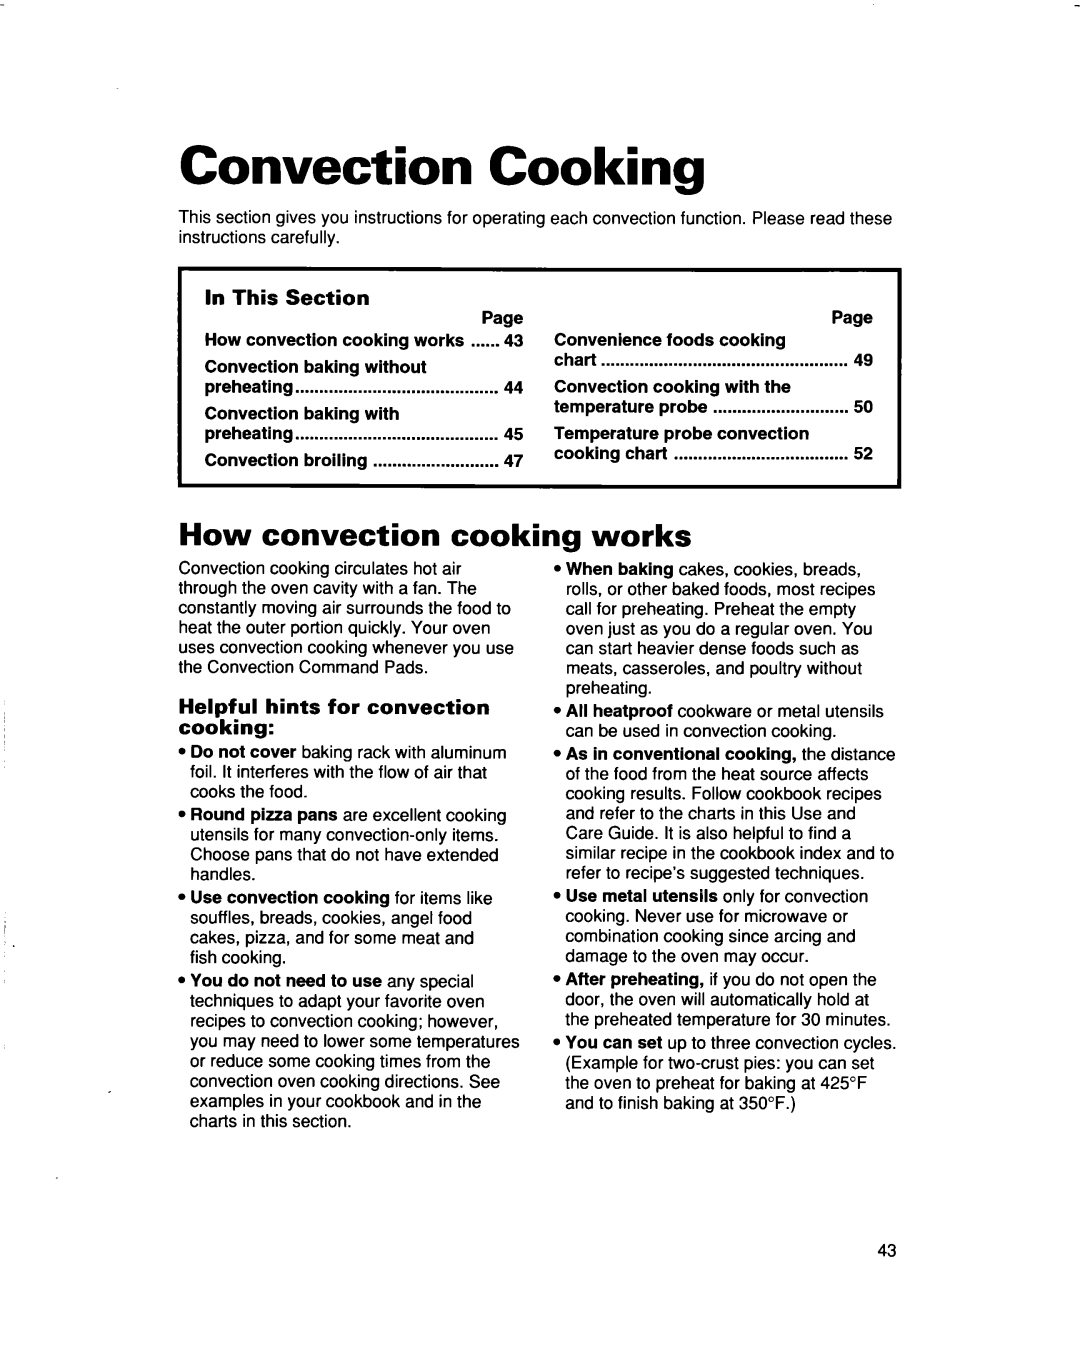 Whirlpool MH9115XB warranty Convection Cooking, How convection cooking works, Helpful hints for convection cooking, In This 